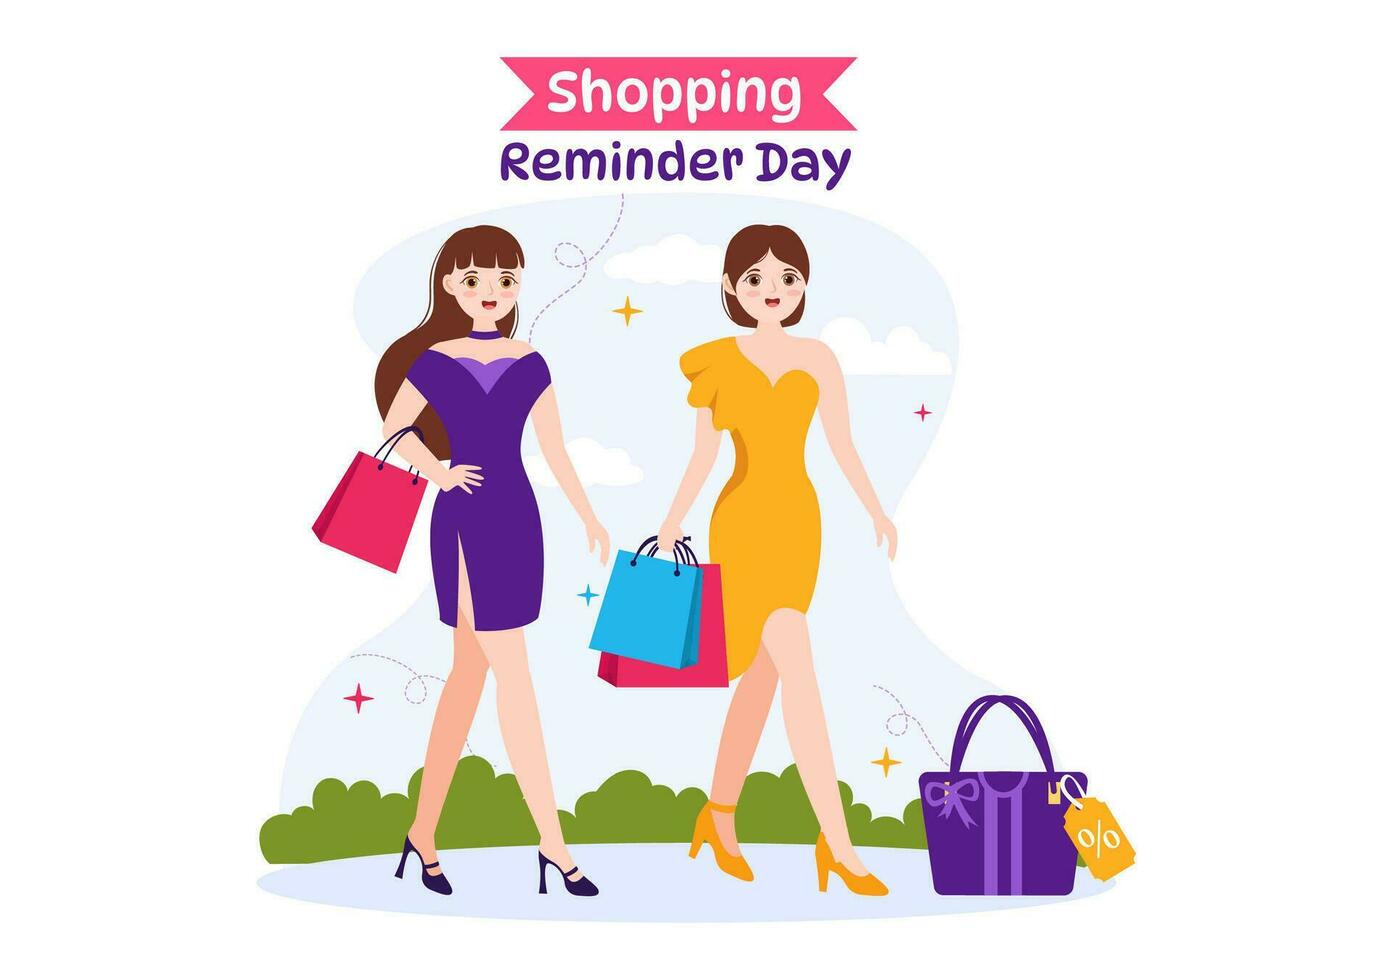 Shopping Reminder Day Vector Illustration on 26 November with Bag and Goods for Poster or Promotion in Flat Cartoon Background Design Templates